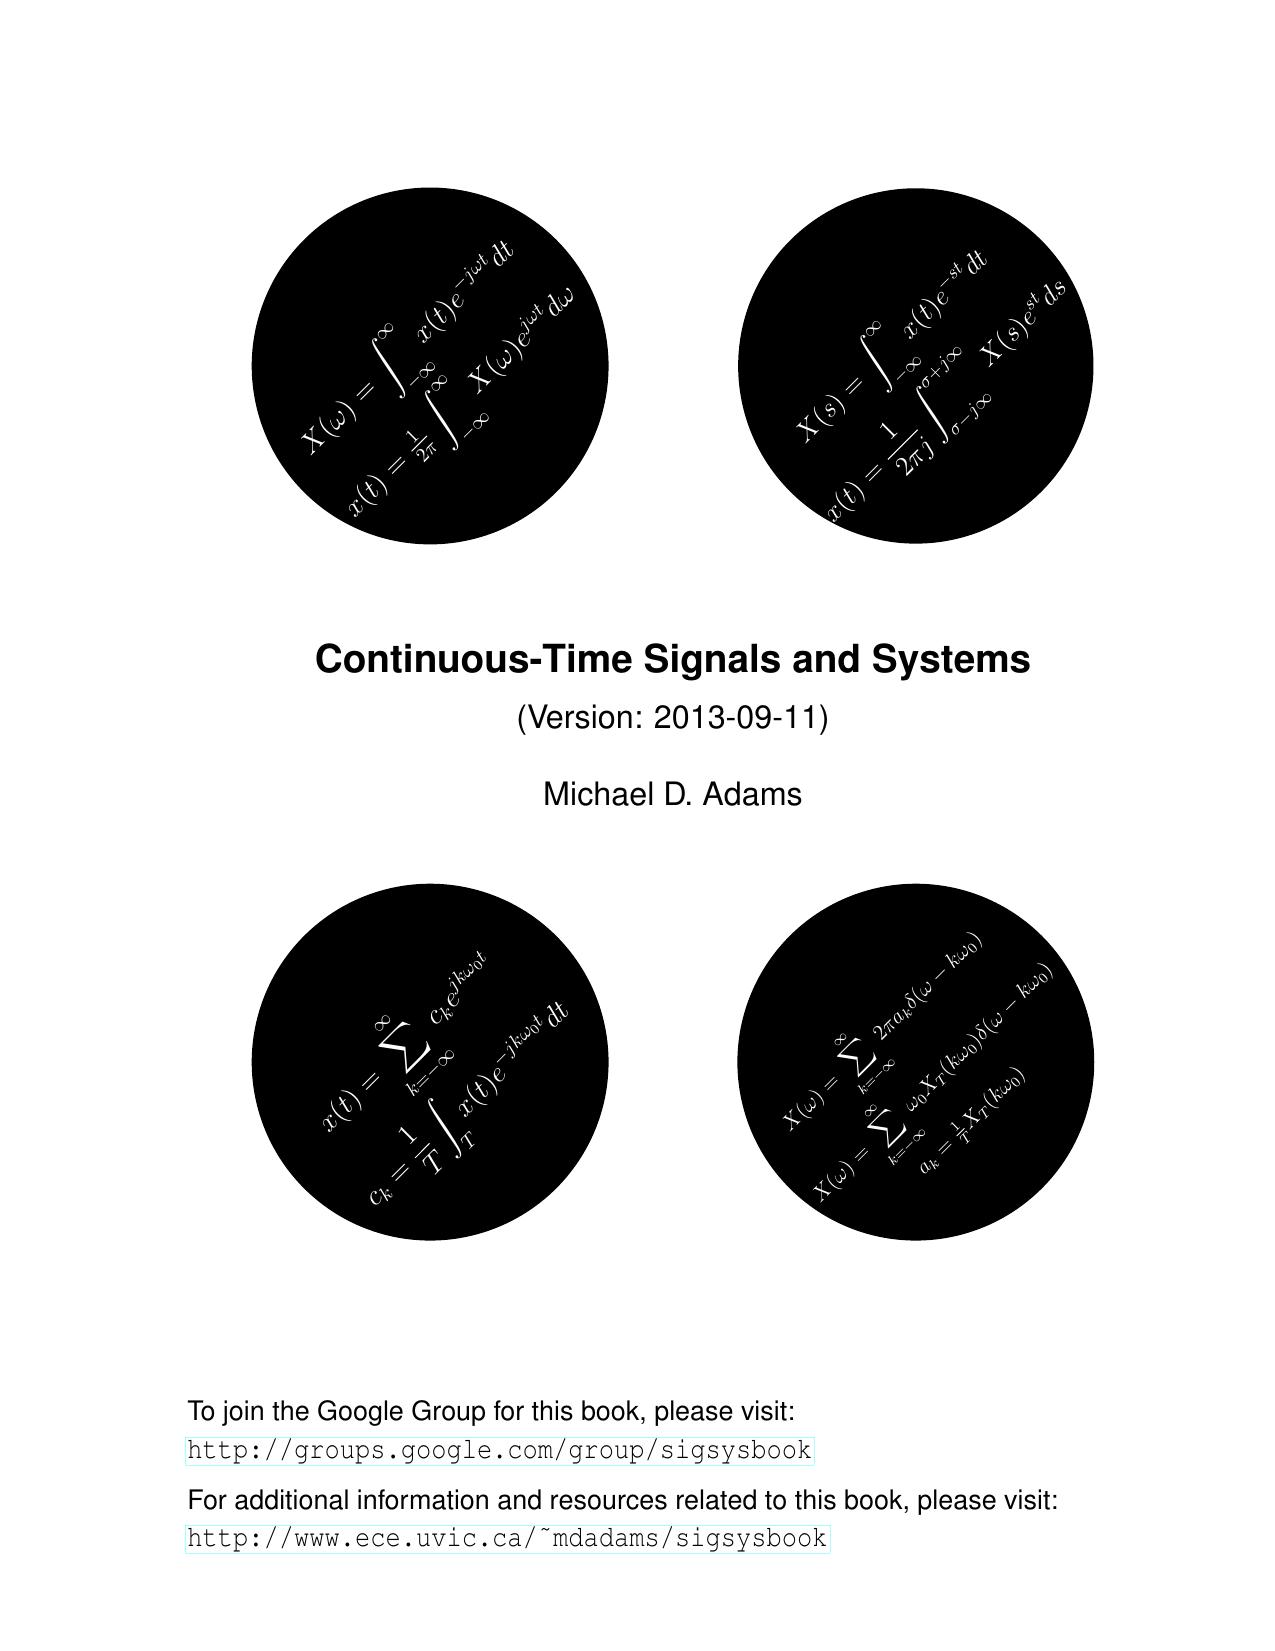 Continuous-Time Signals and Systems